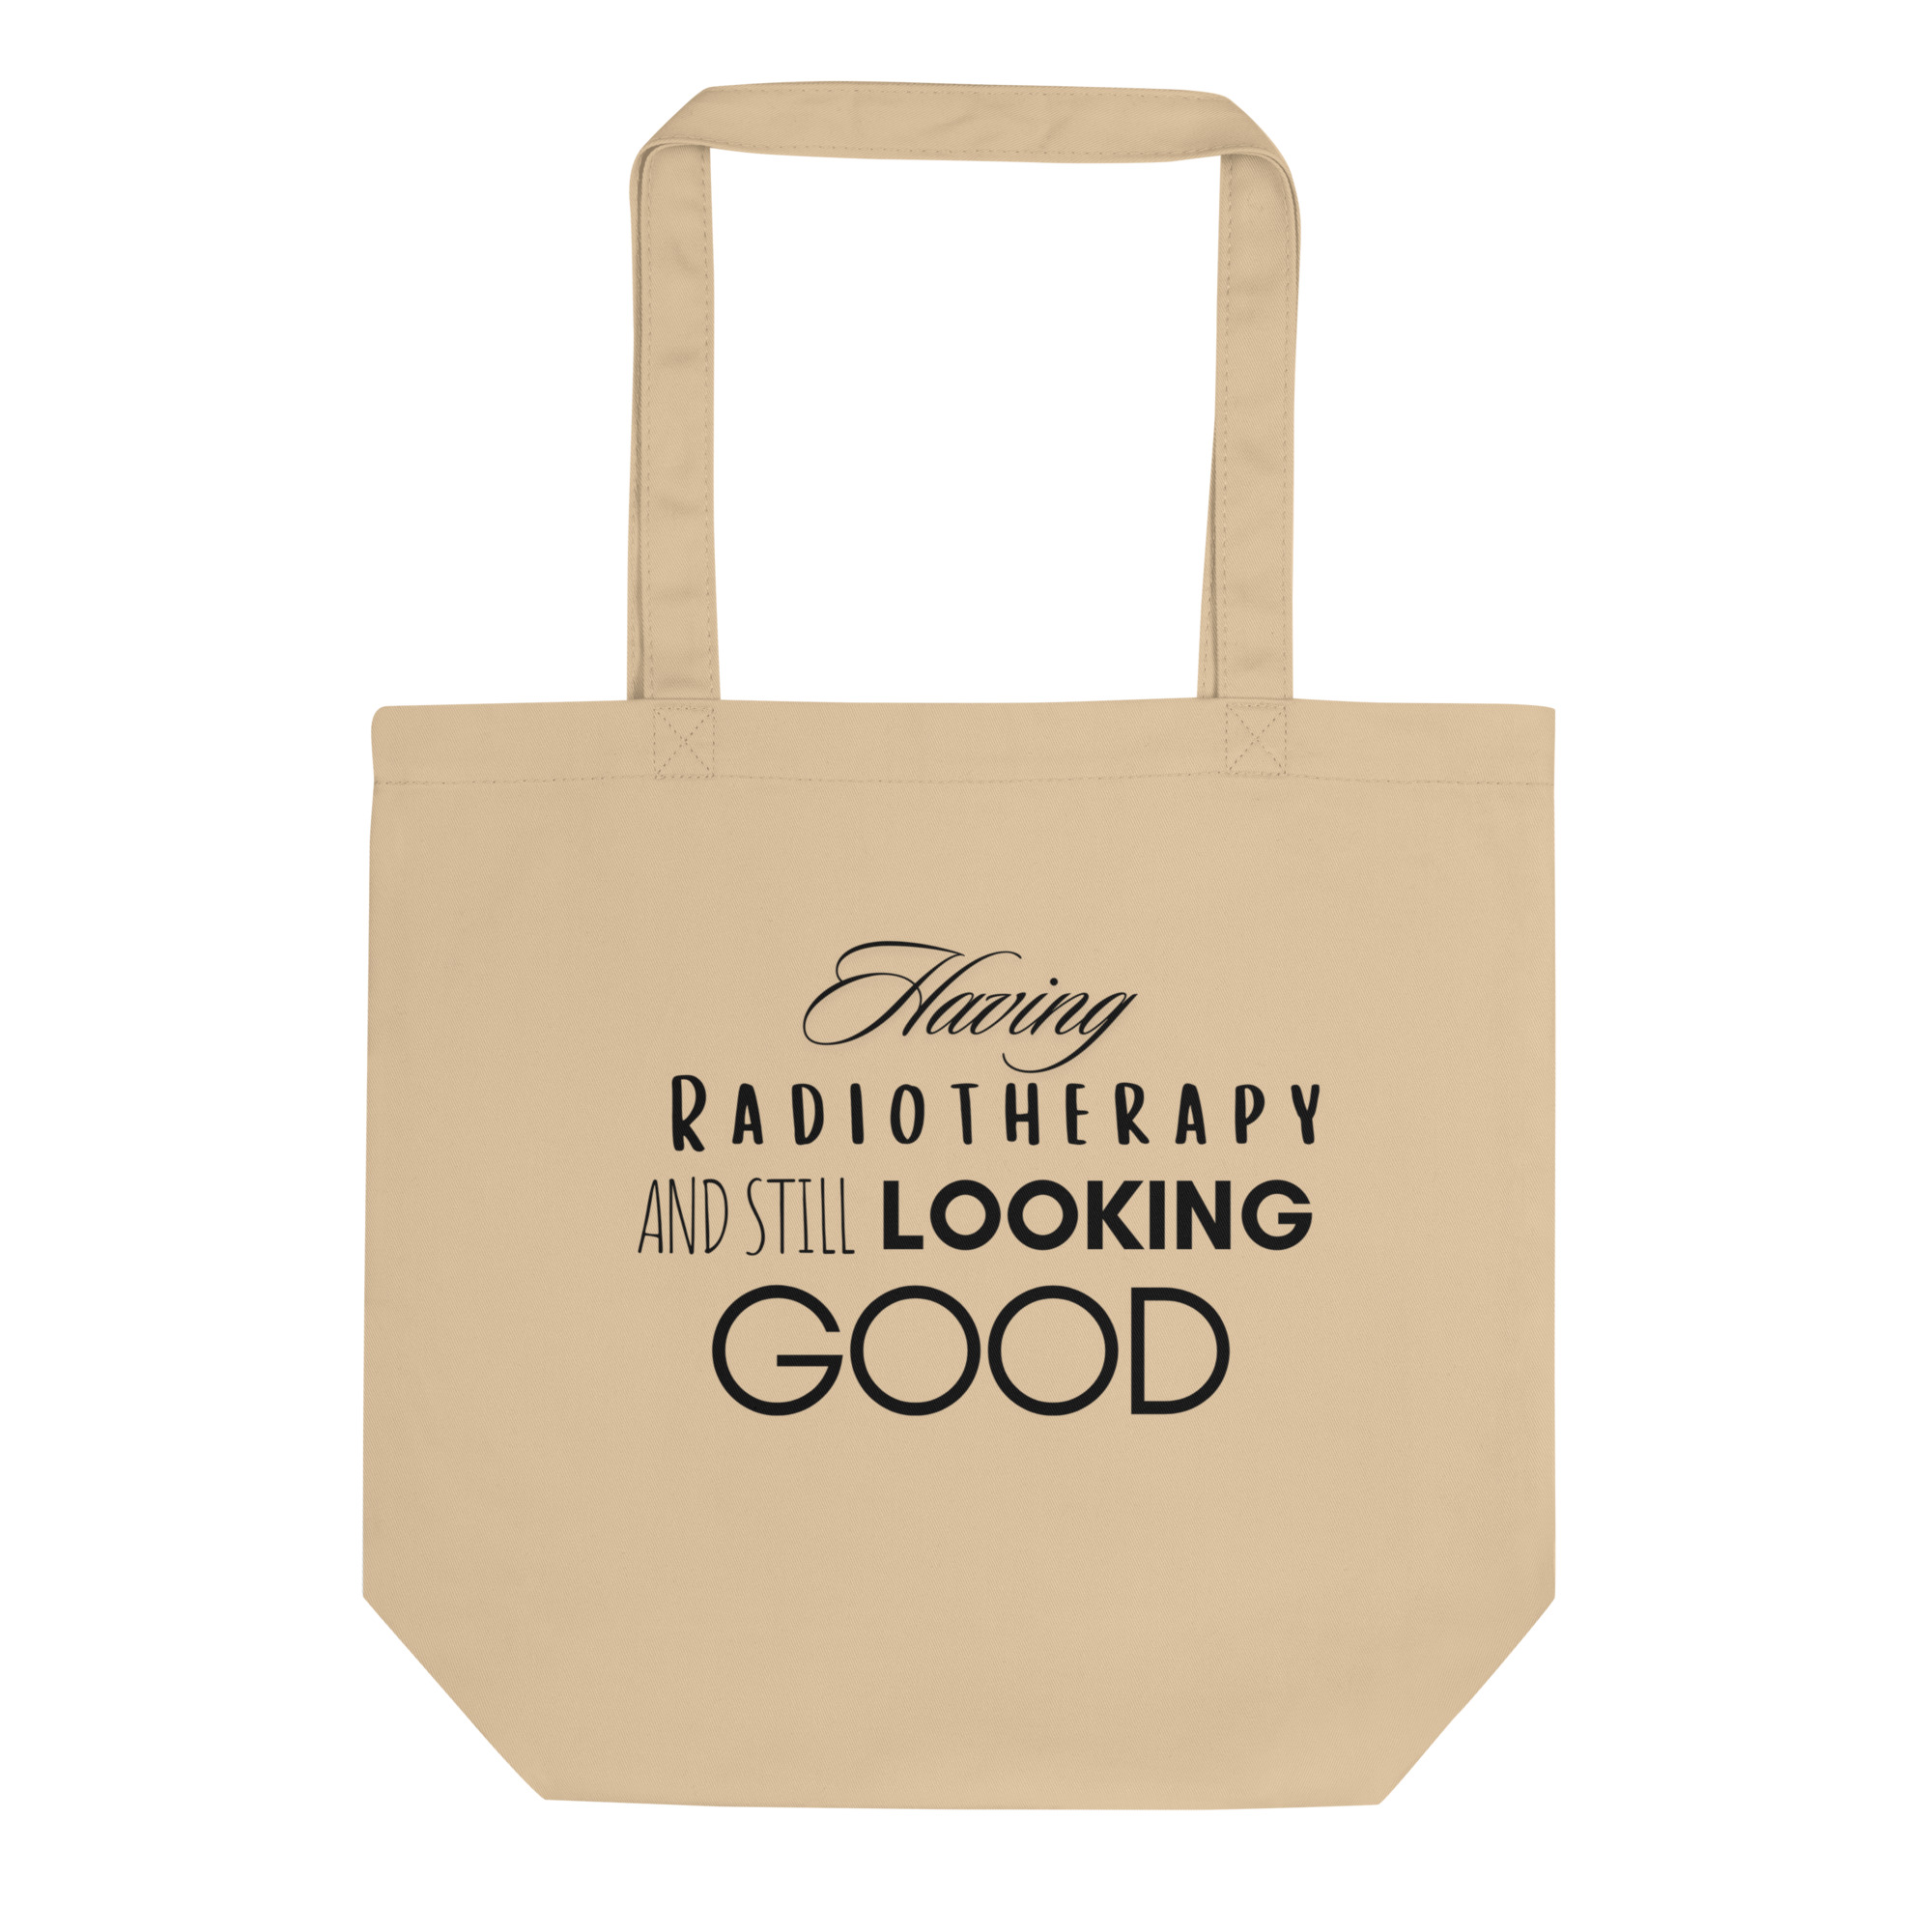 eco-tote-bag-oyster-front-65a029c9ea89f.jpg